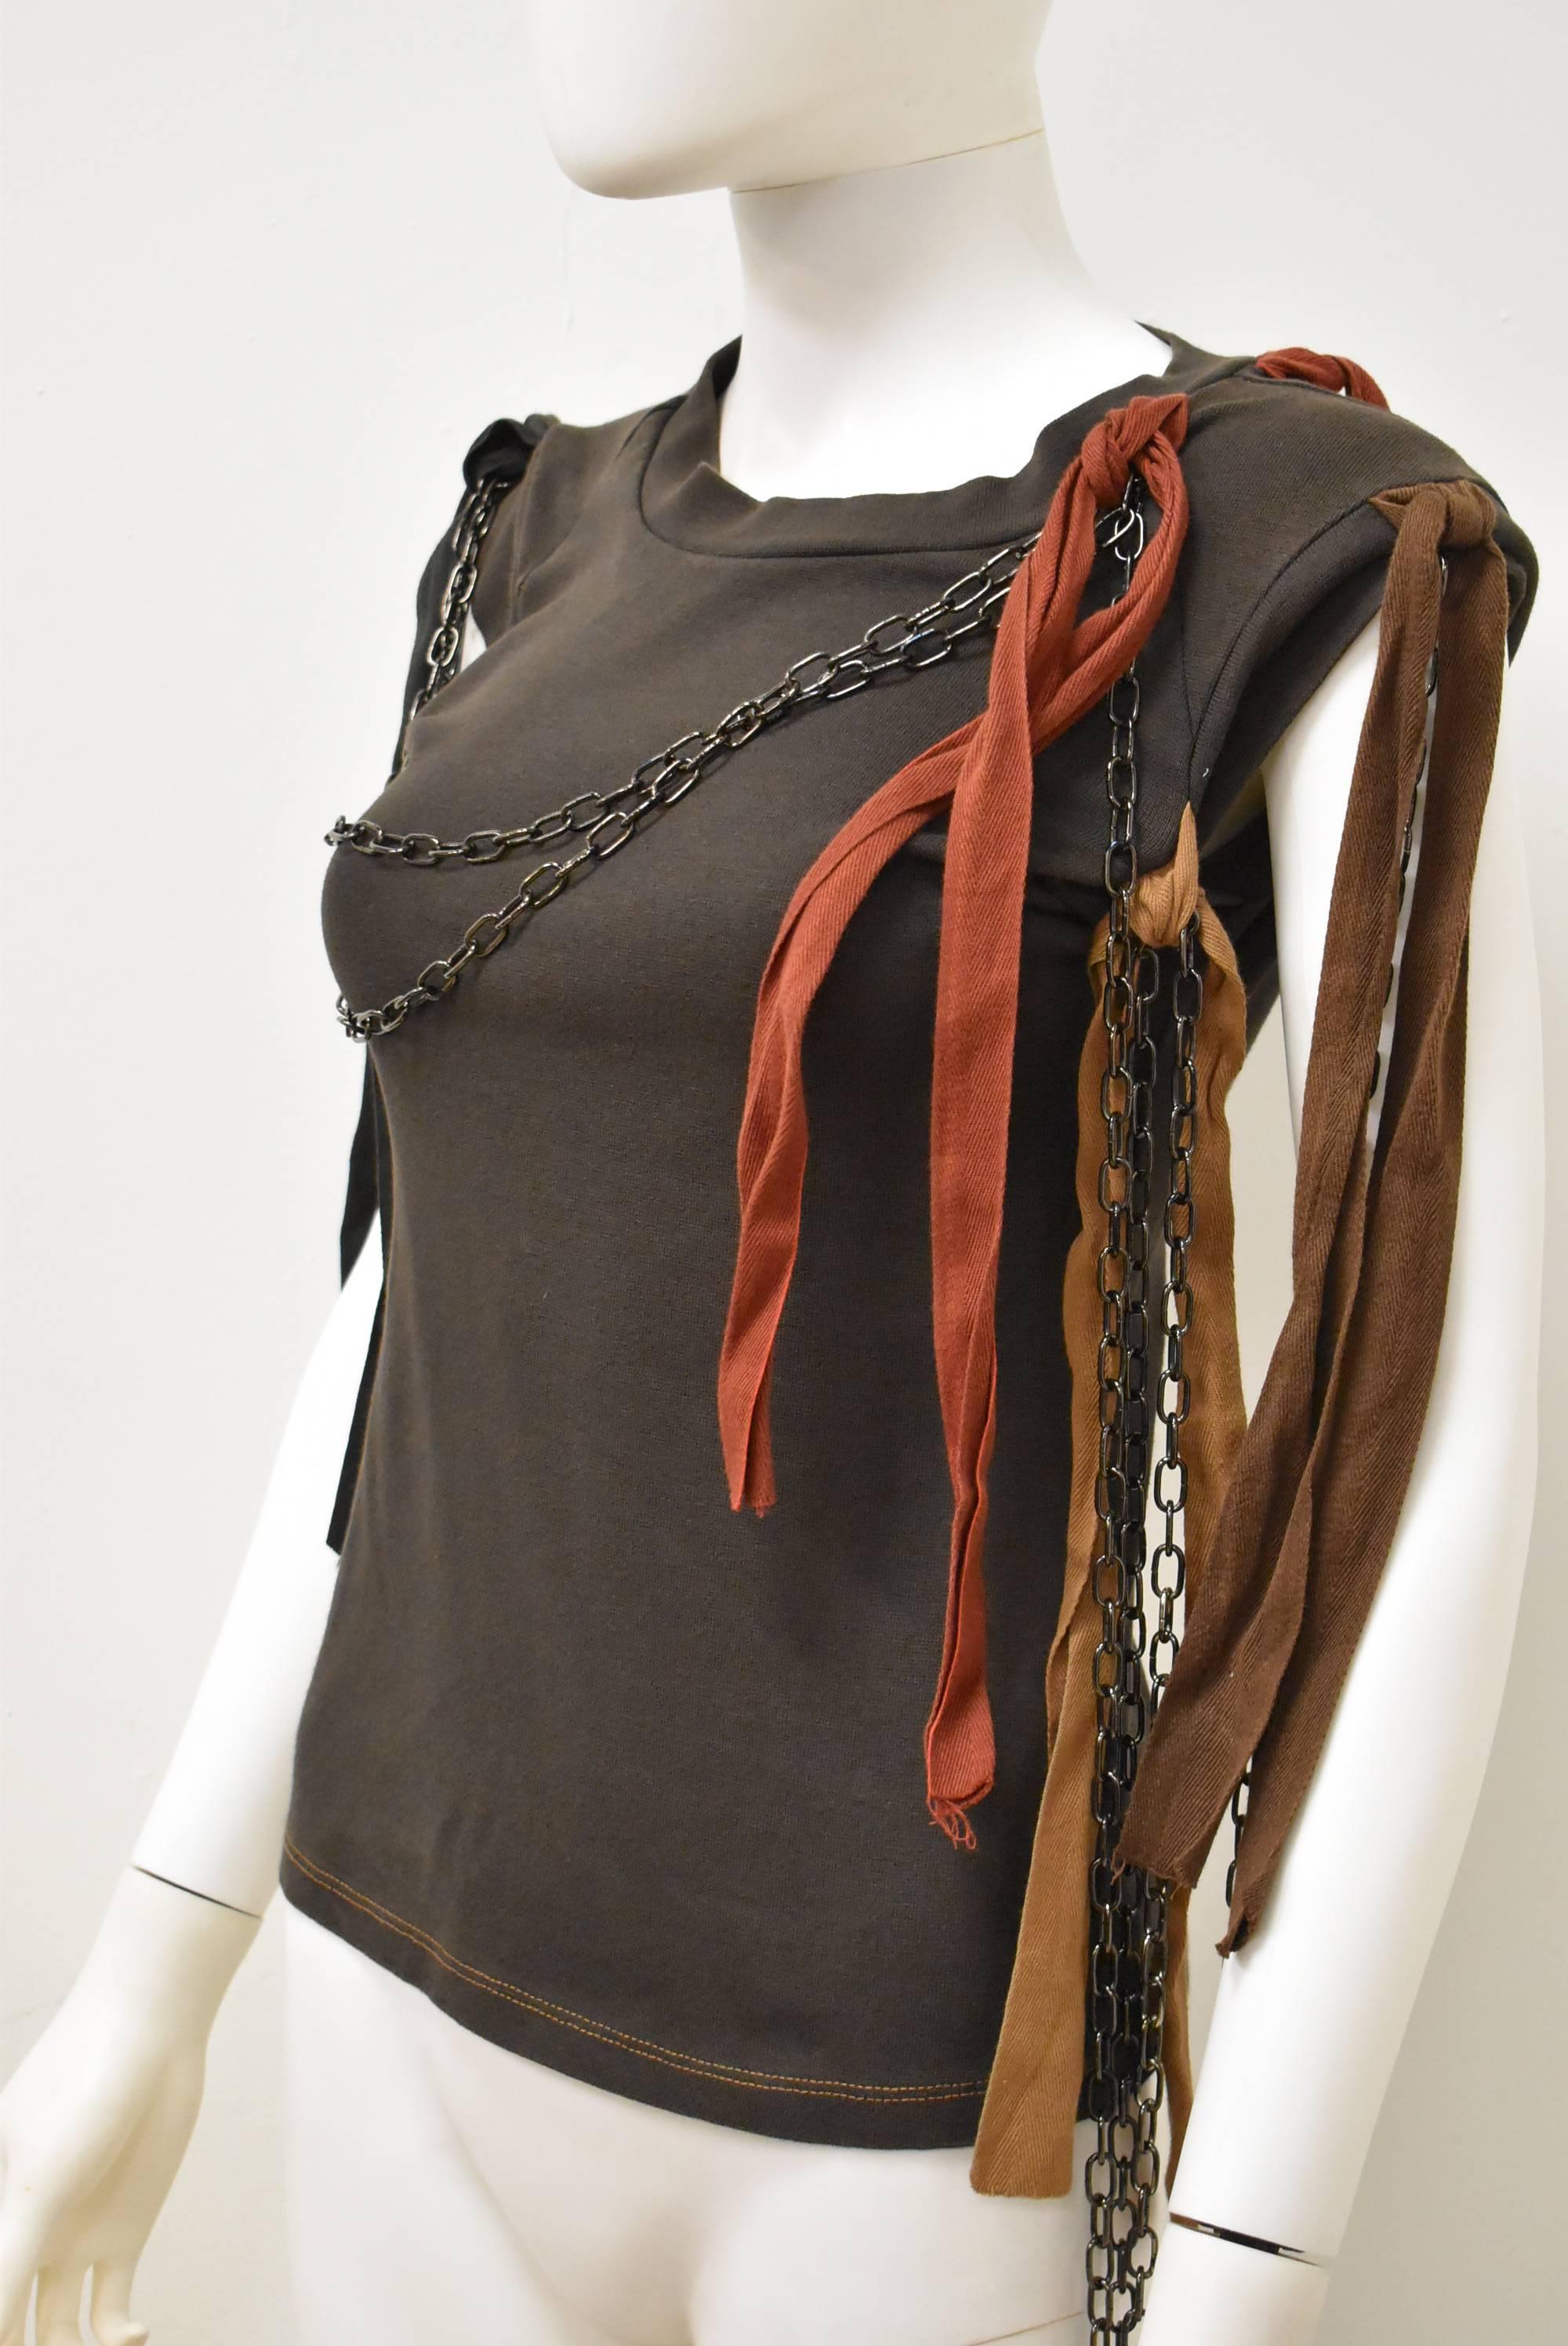 Black Vivienne Westwood Brown Top with Metal Chains and Ribbons